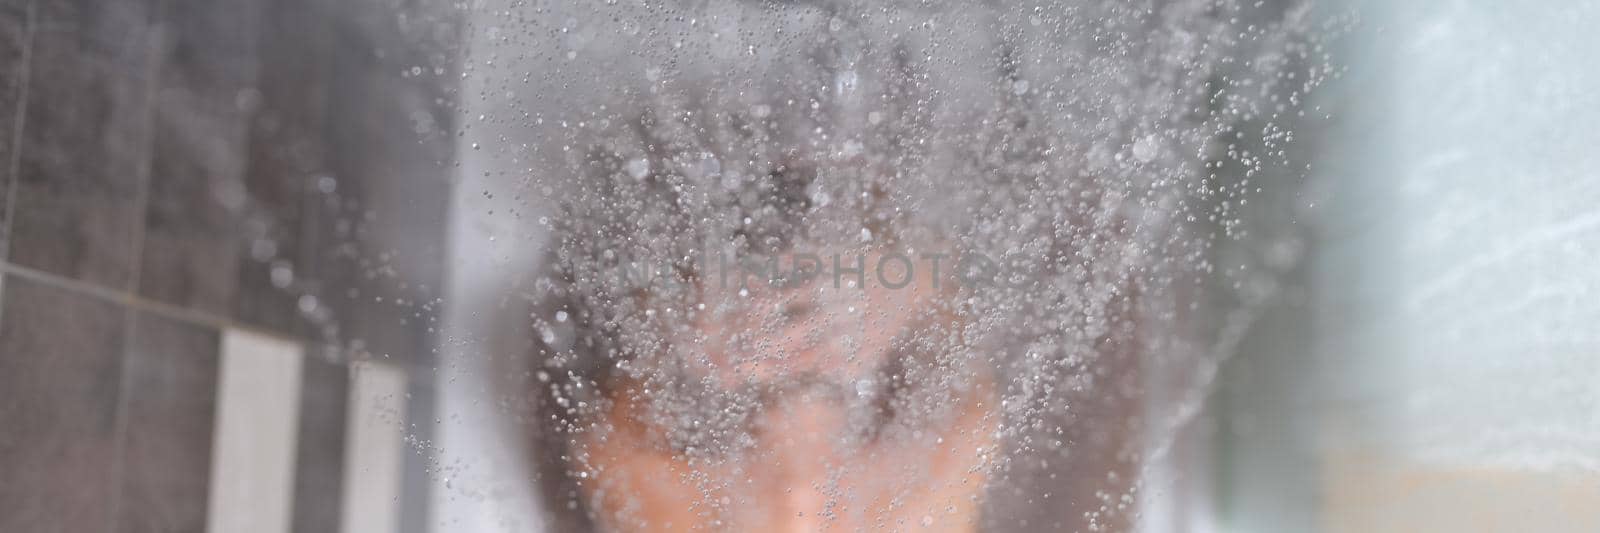 Woman sits in bathtub, water is poured on top of back. Depressed woman taking a bath concept